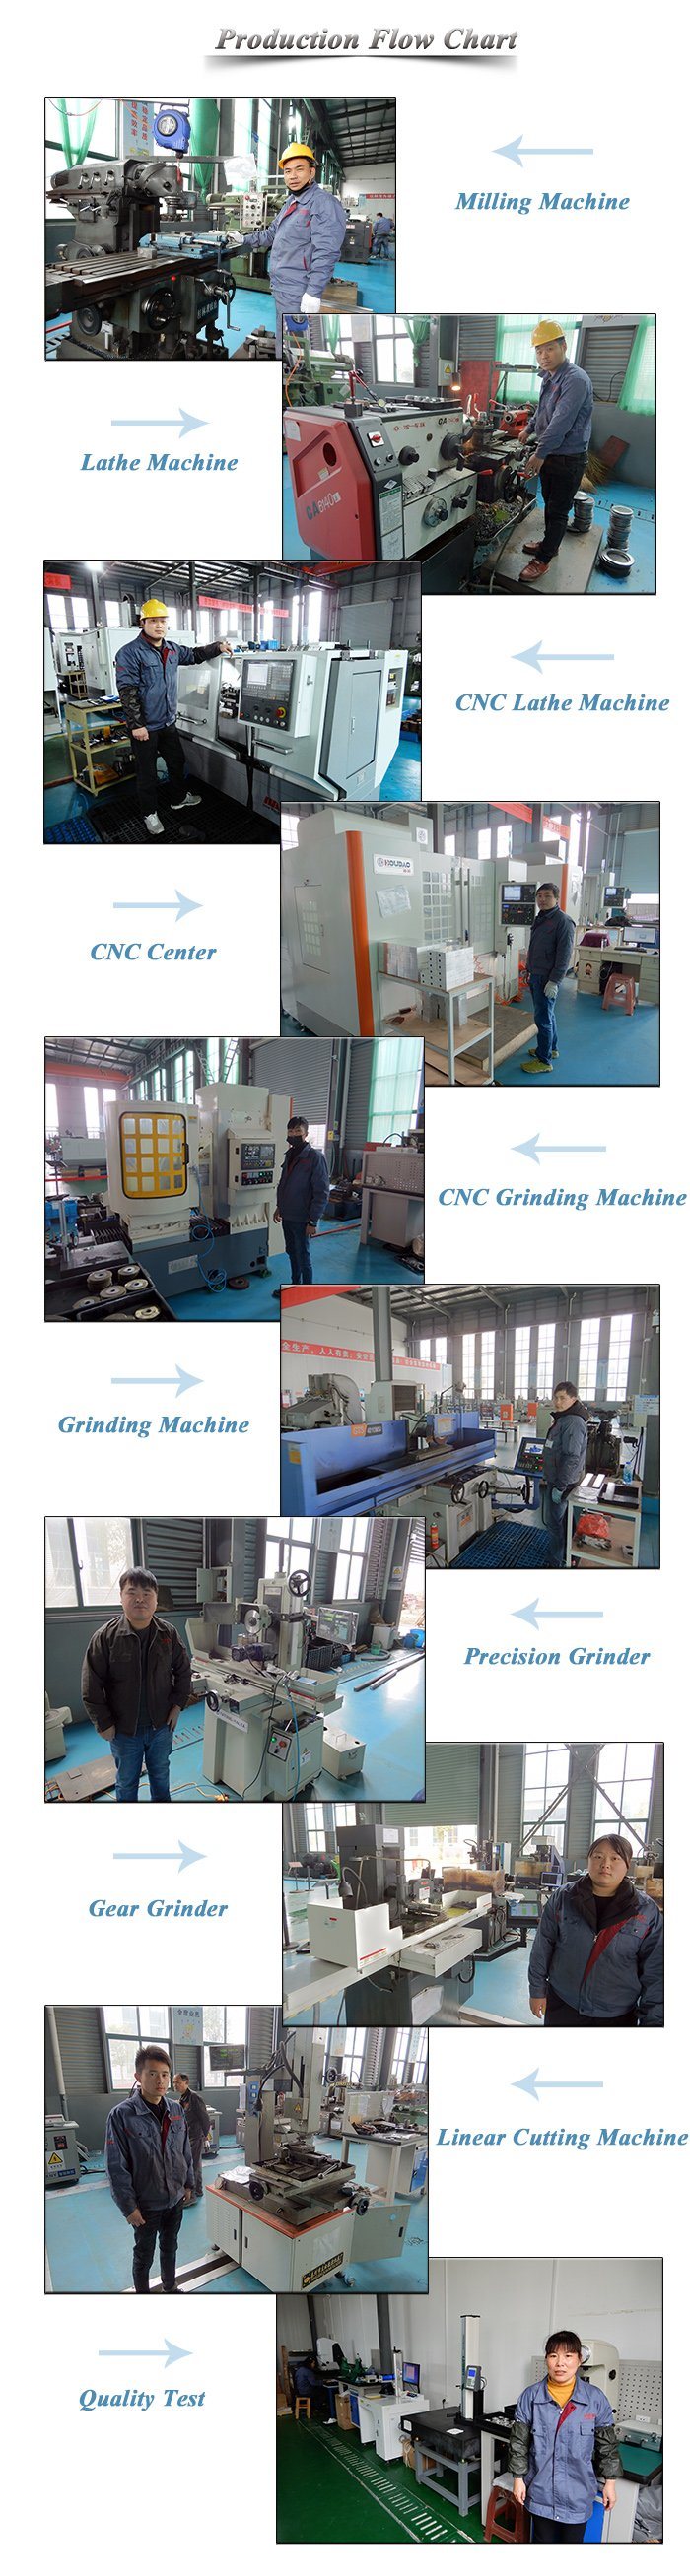 Knives Manufacture Machine Knife Tube Pipe Circular Slitting Cutter Knife/Cutting Blade with Axle Bearing of Shaft/Gudgeon Block for Splitting Machine From Ruil